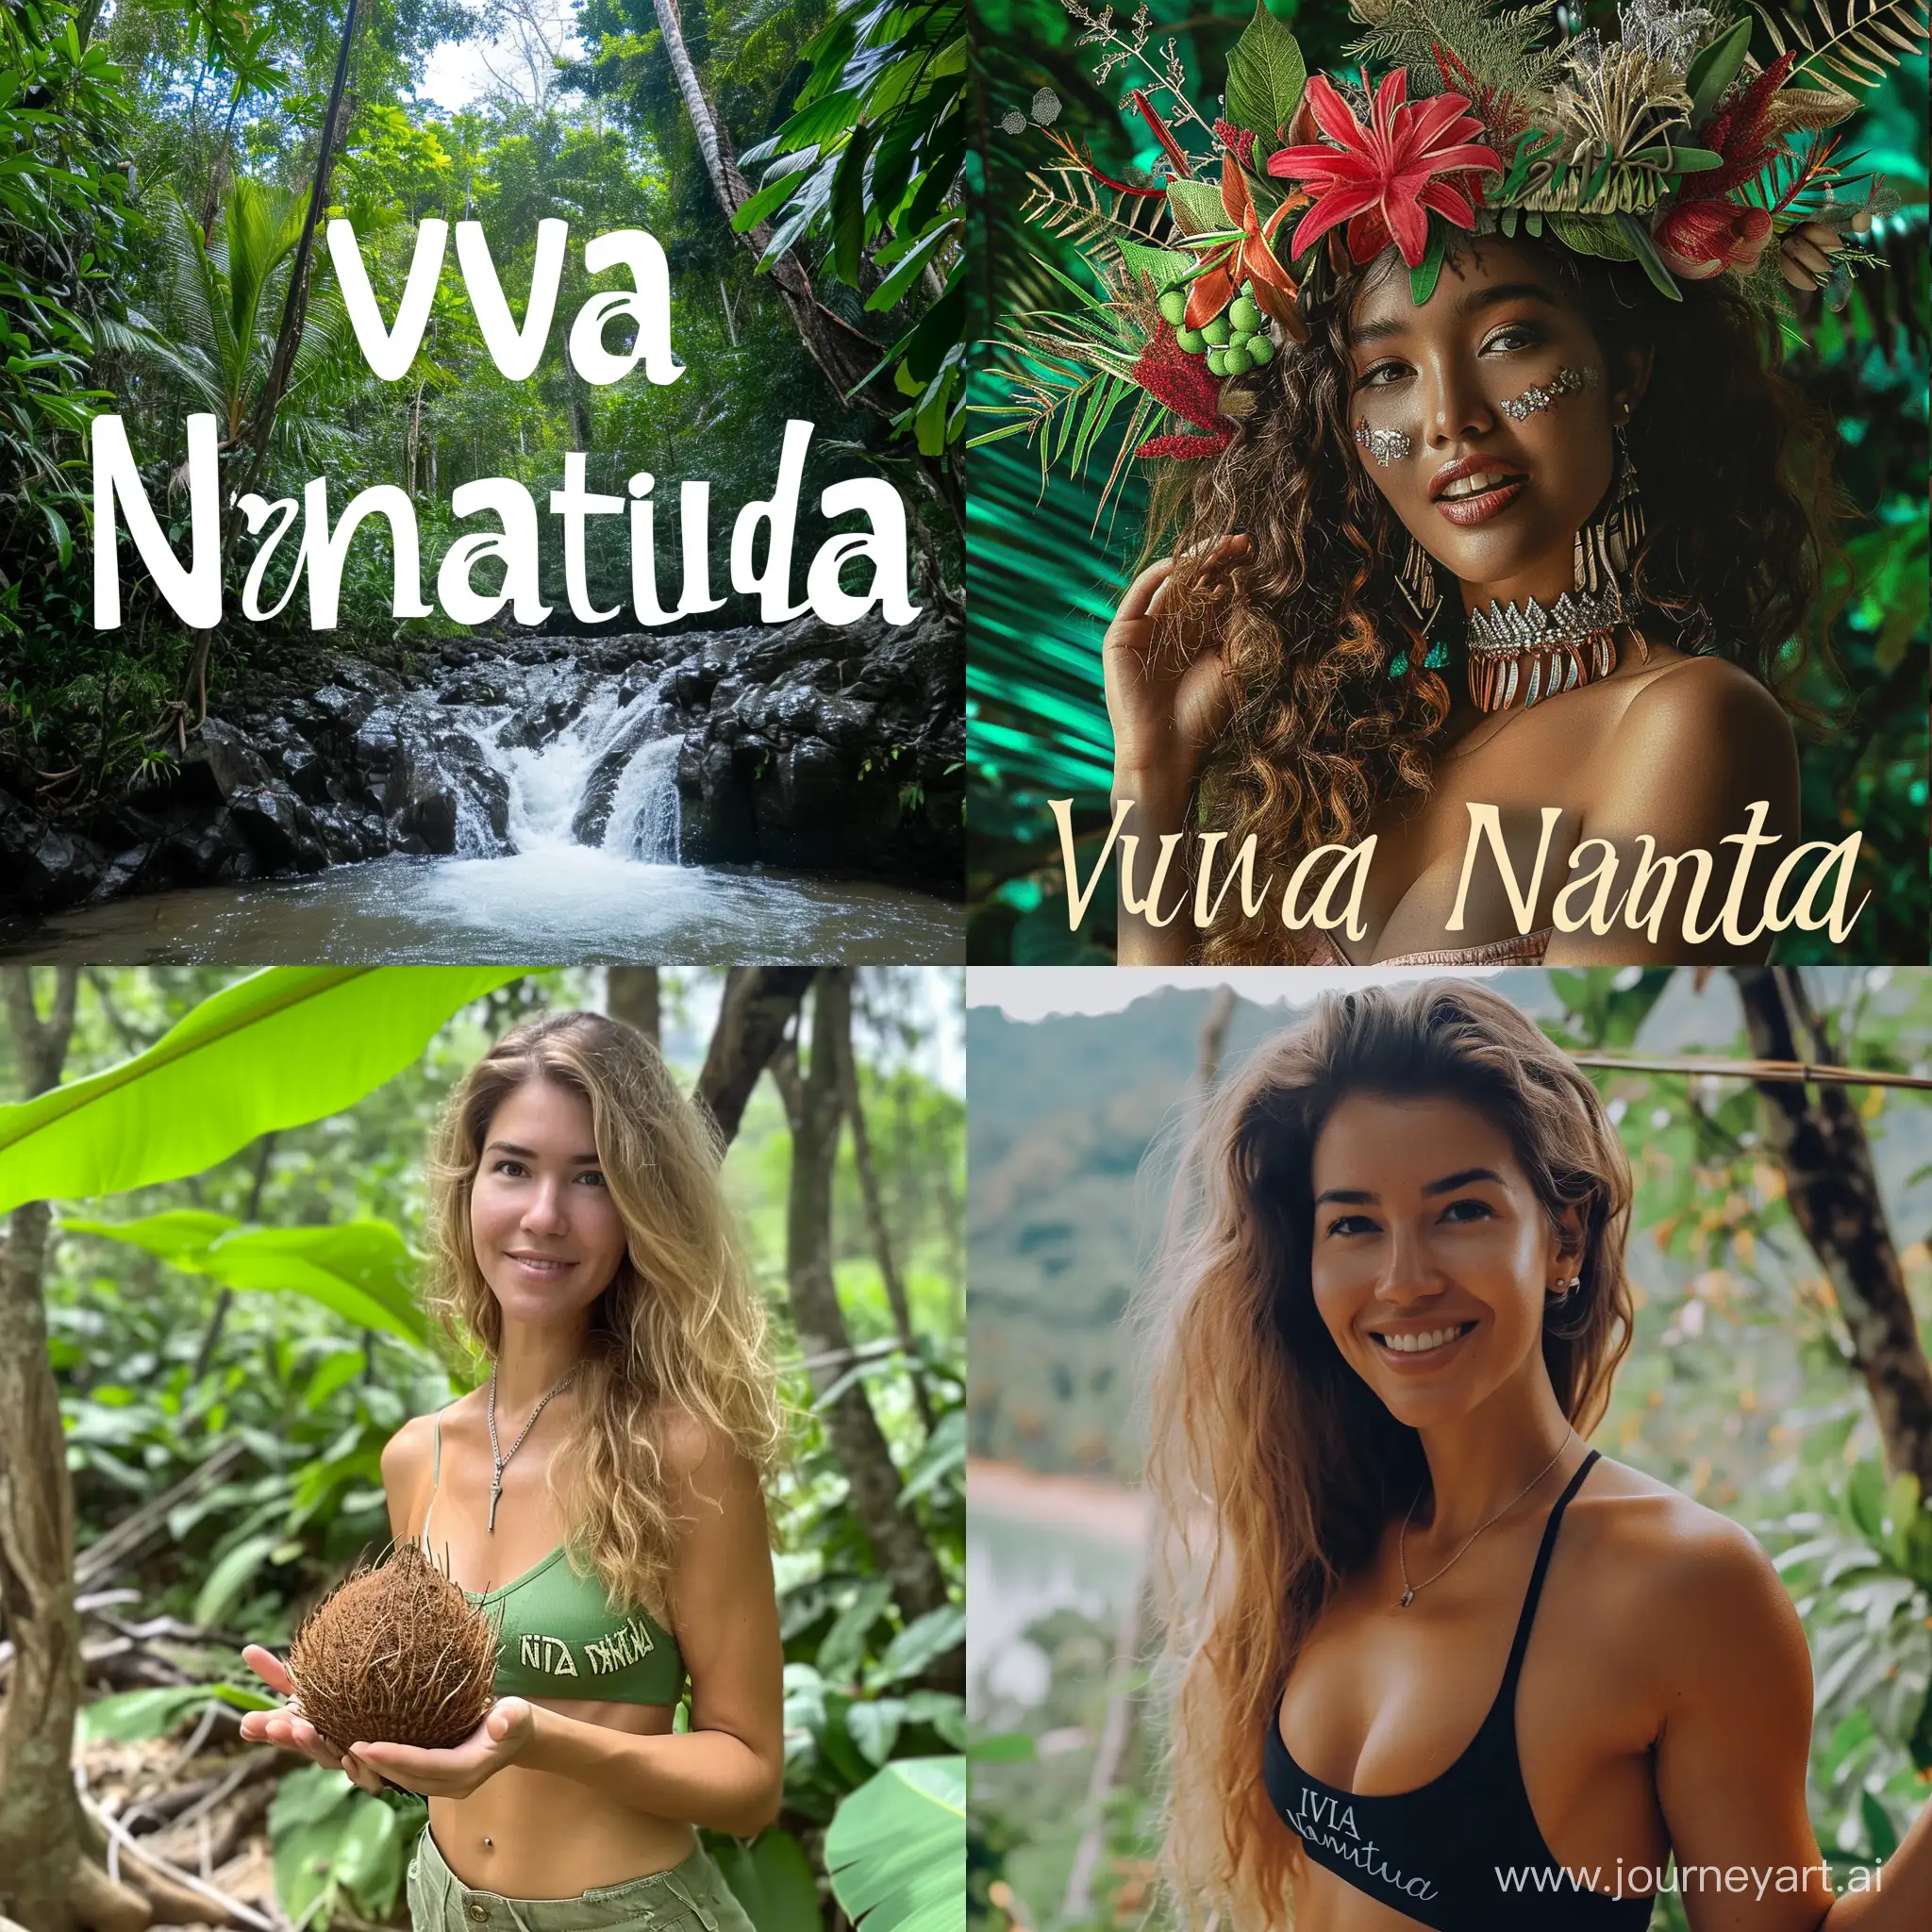 Viva-Nature-YouTube-Channel-Profile-Picture-with-Vibrant-Flora-and-Fauna